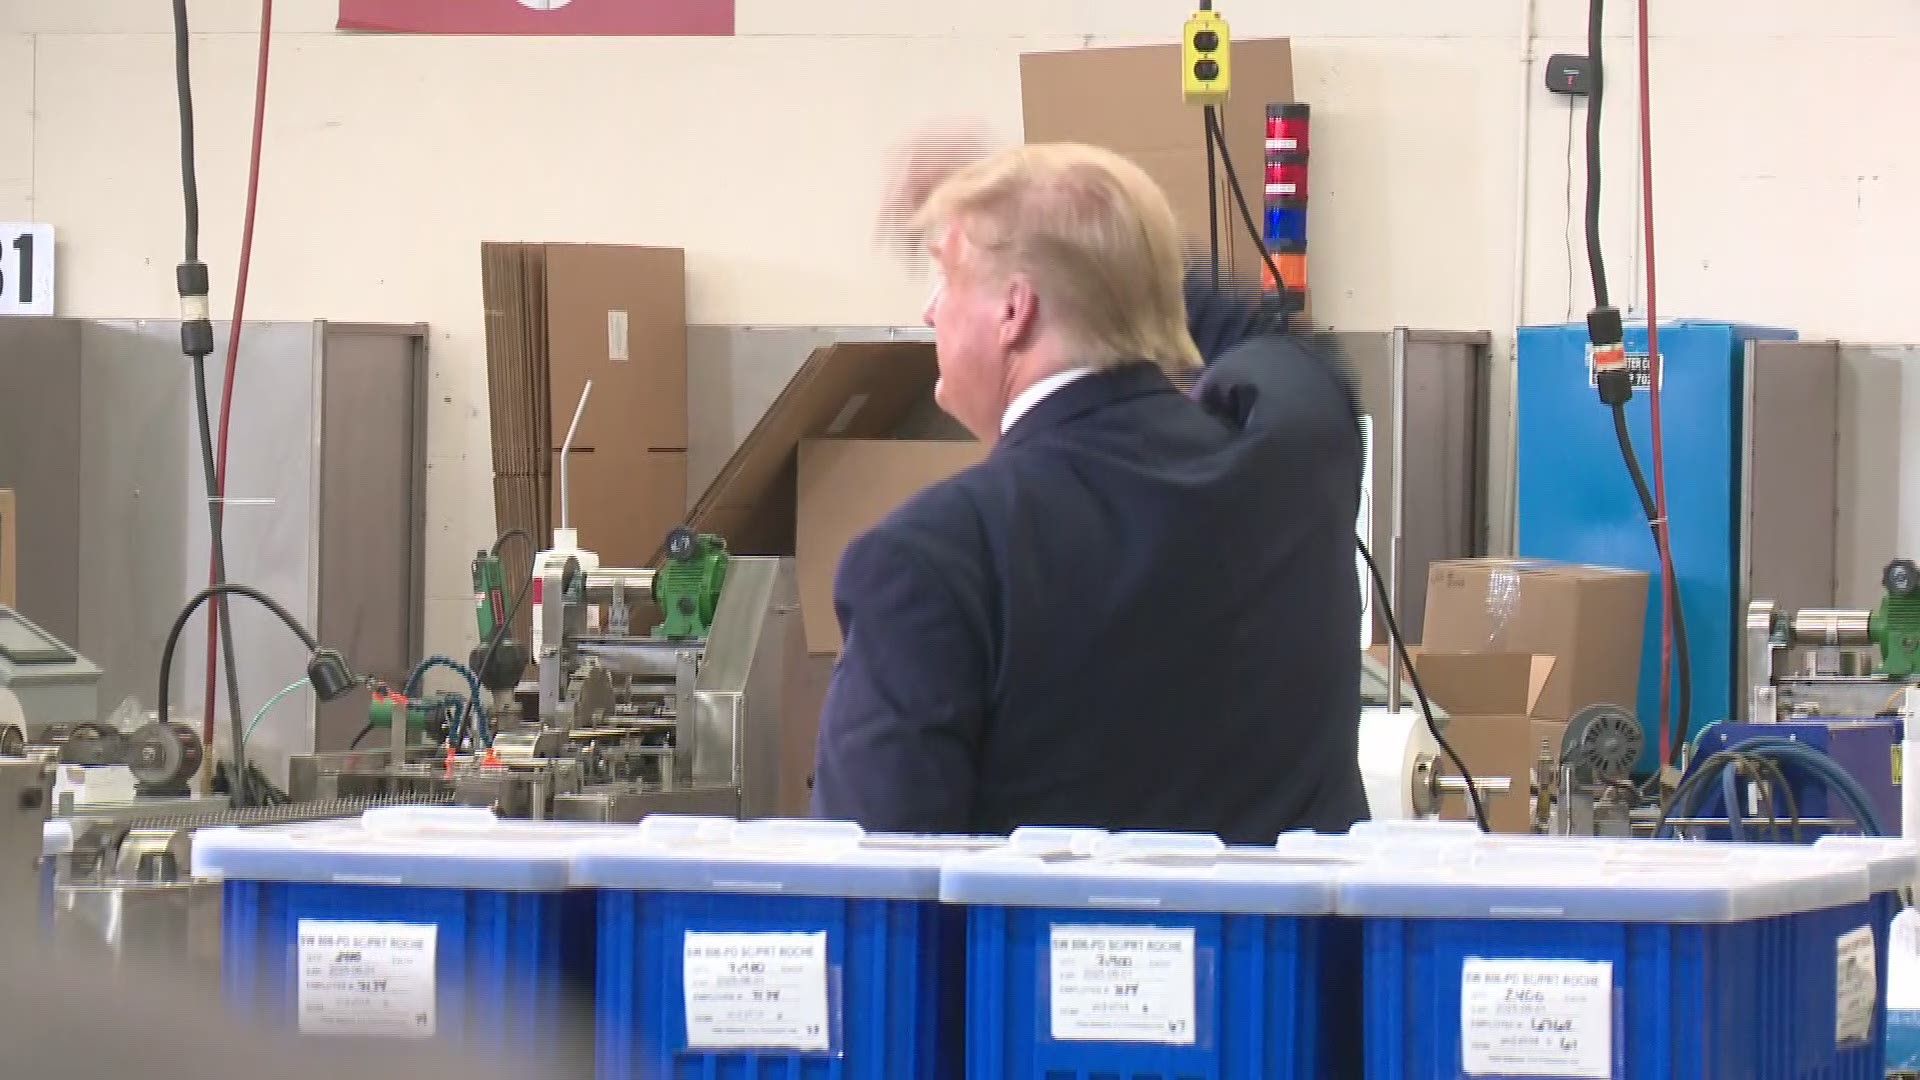 President Trump tours the production floor at the Puritan plant in Guilford. USA Today reported all of the swabs manufactured during the toor will be thrown out